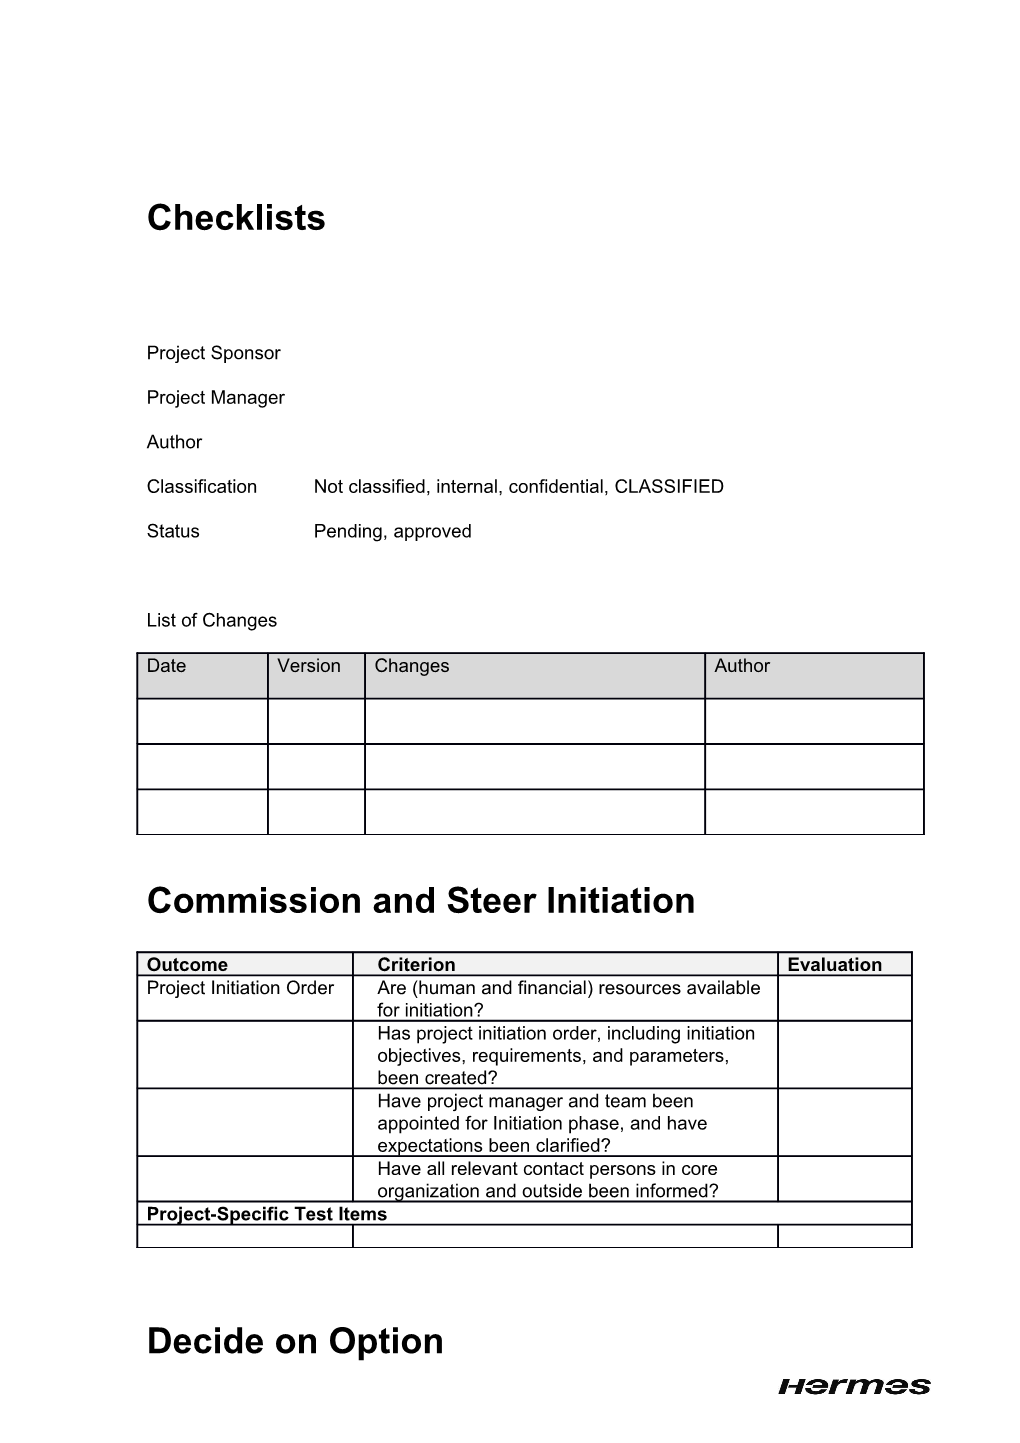 Commission and Steer Initiation